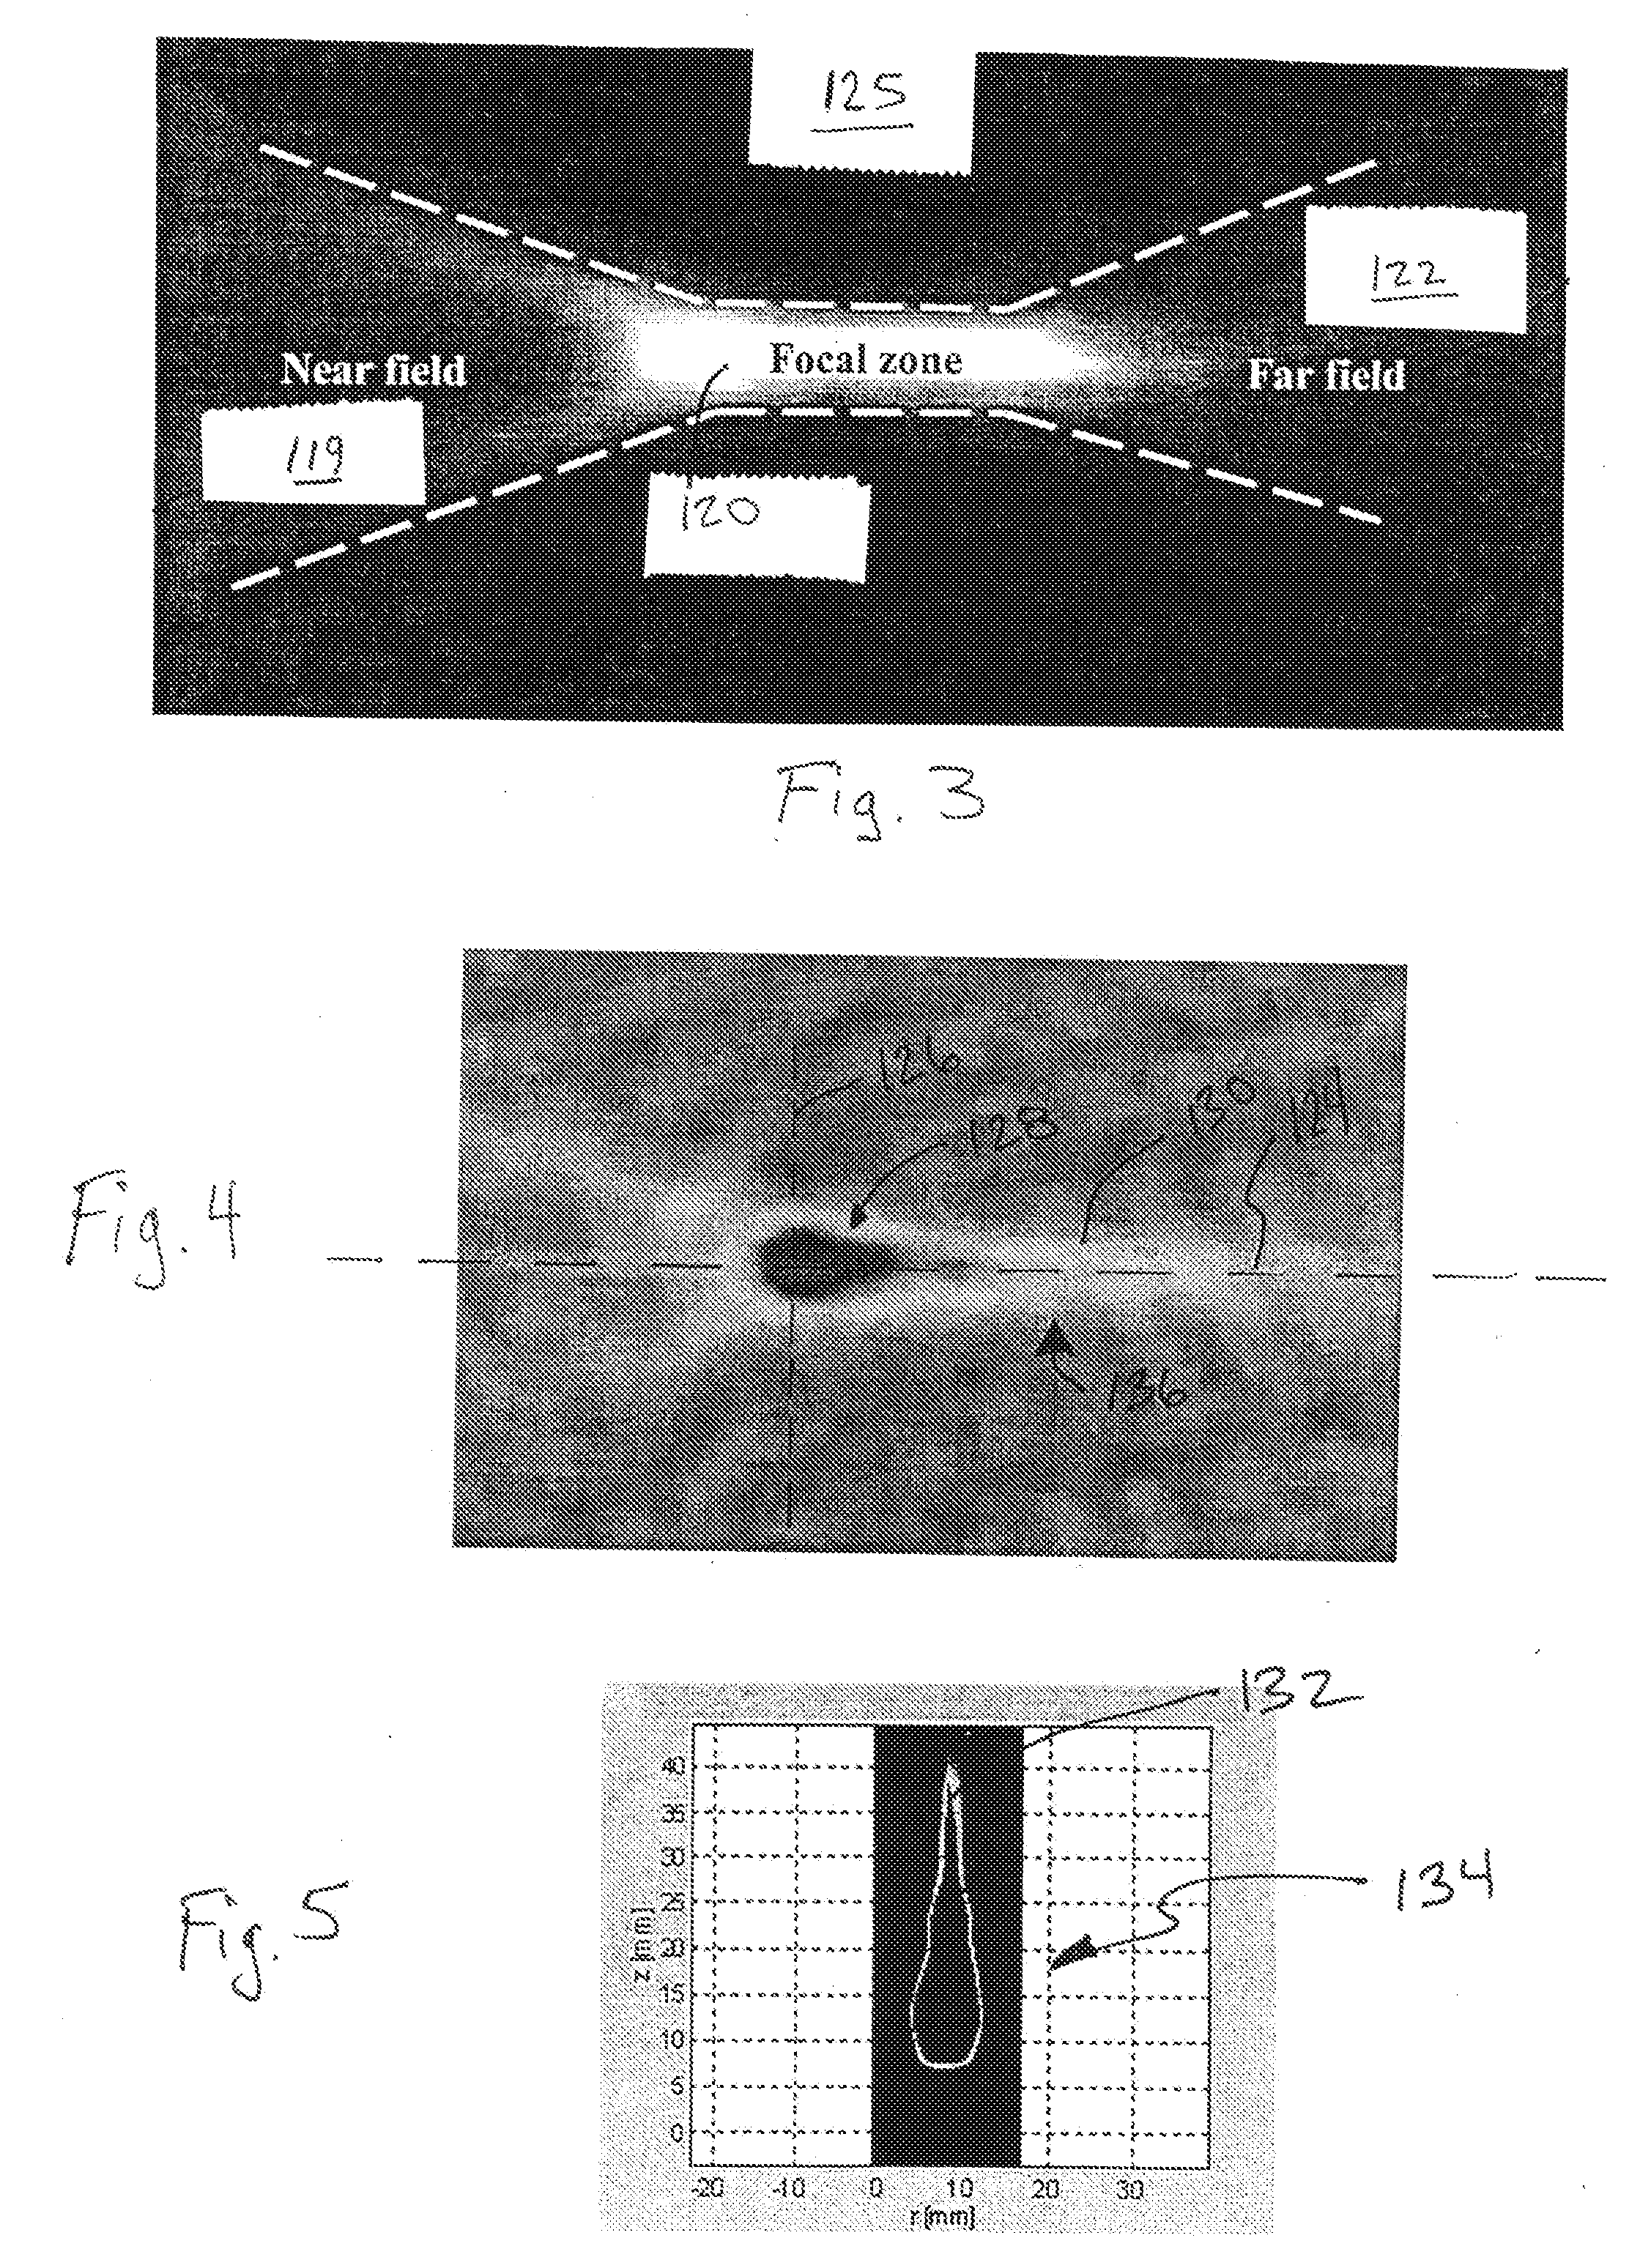 Focused ultrasound system with far field tail suppression